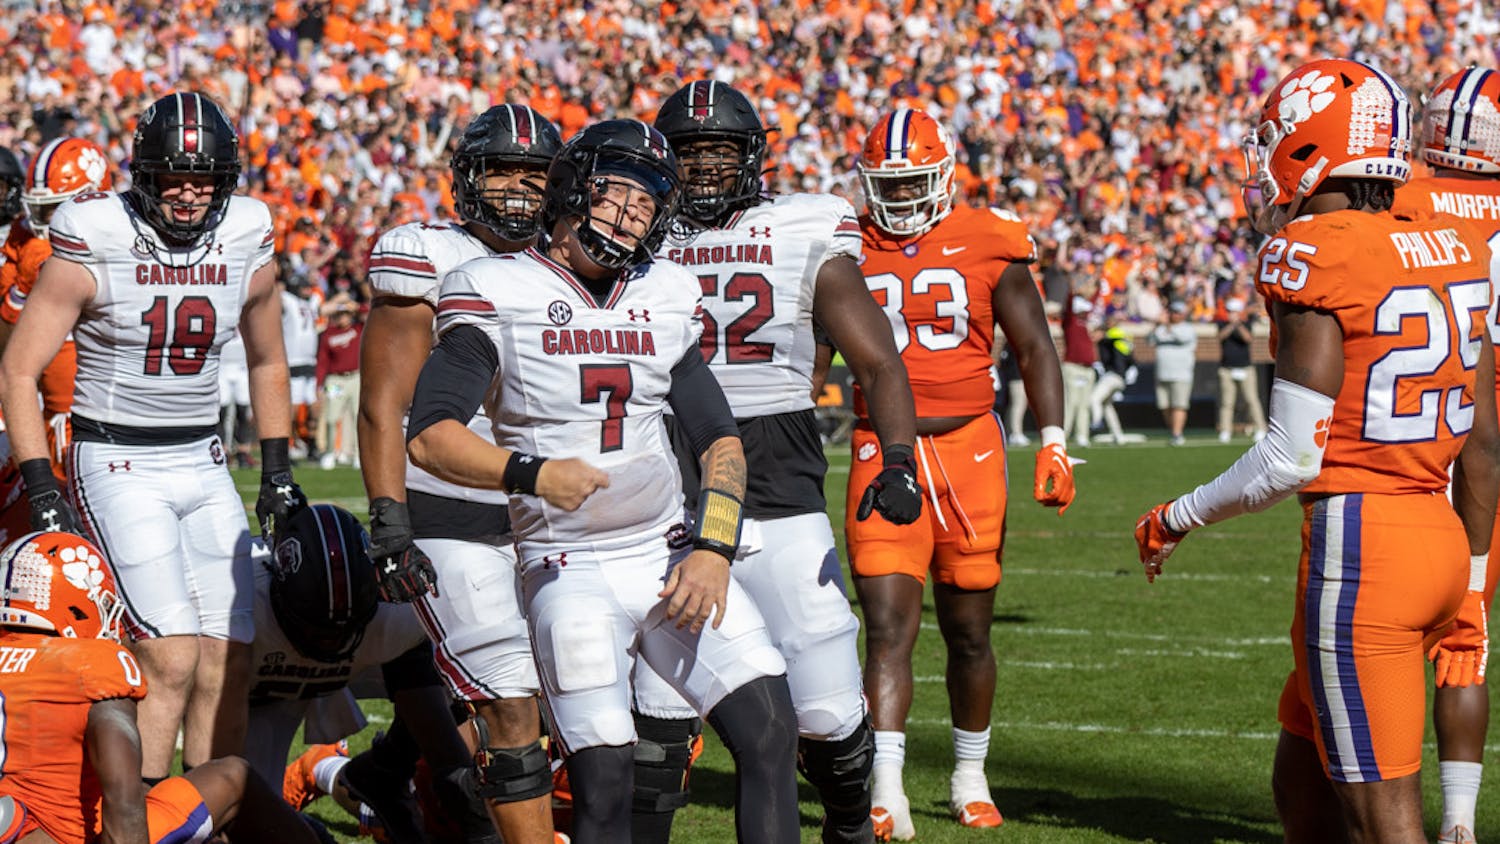 Redshirt junior quarterback Spencer Rattler celebrates after his touchdown on Nov. 26, 2022 at Memorial Stadium. The Gamecocks made a total of four touchdowns against Clemson.